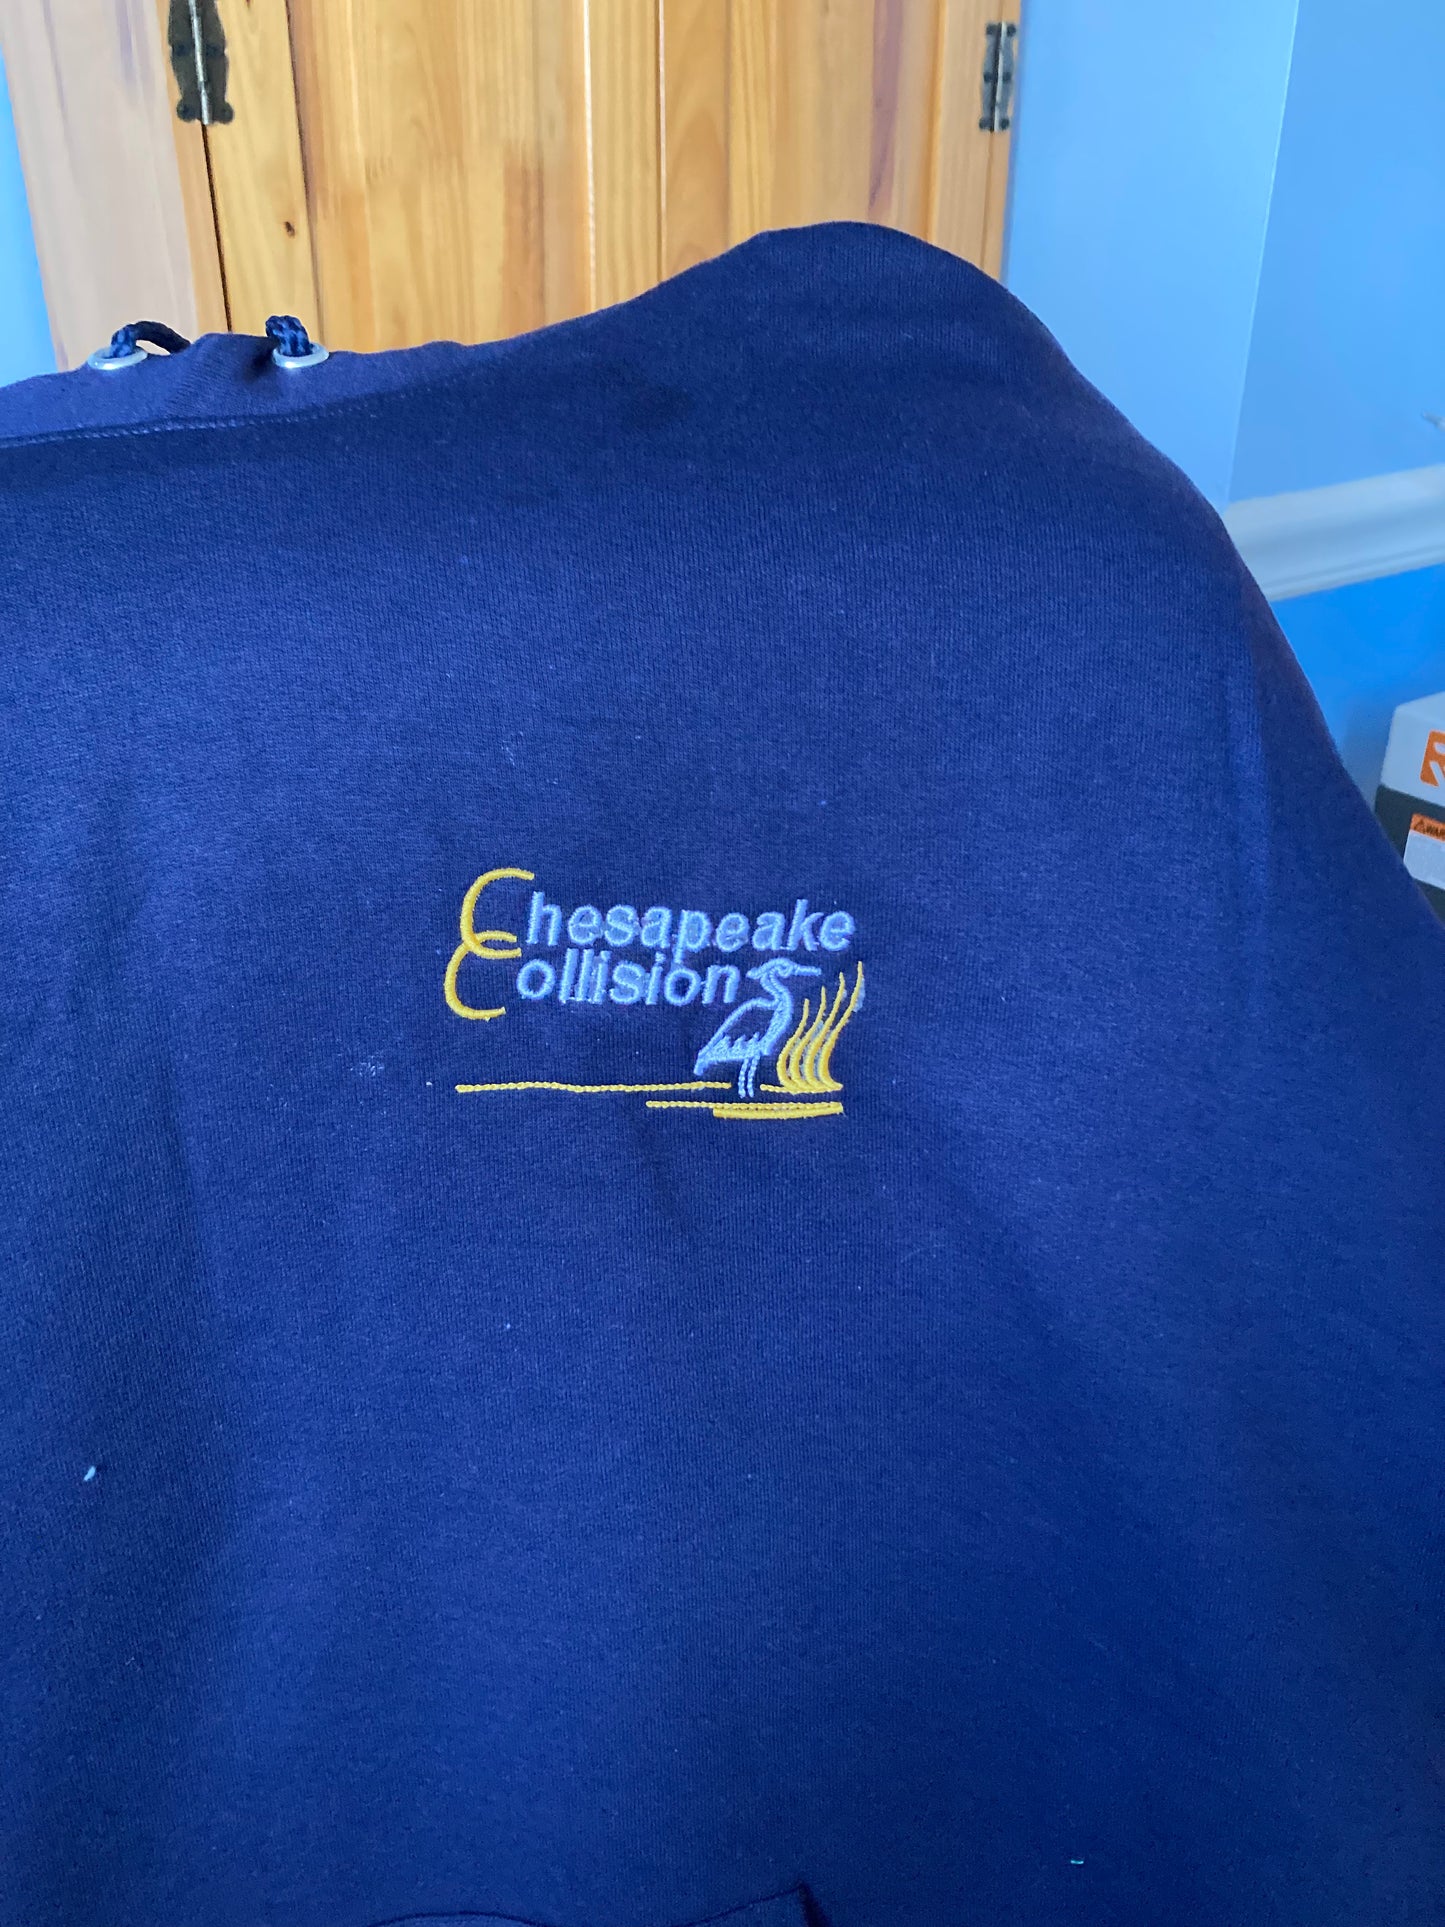 Customize Your Apparel with Custom Sweatshirts or Jackets